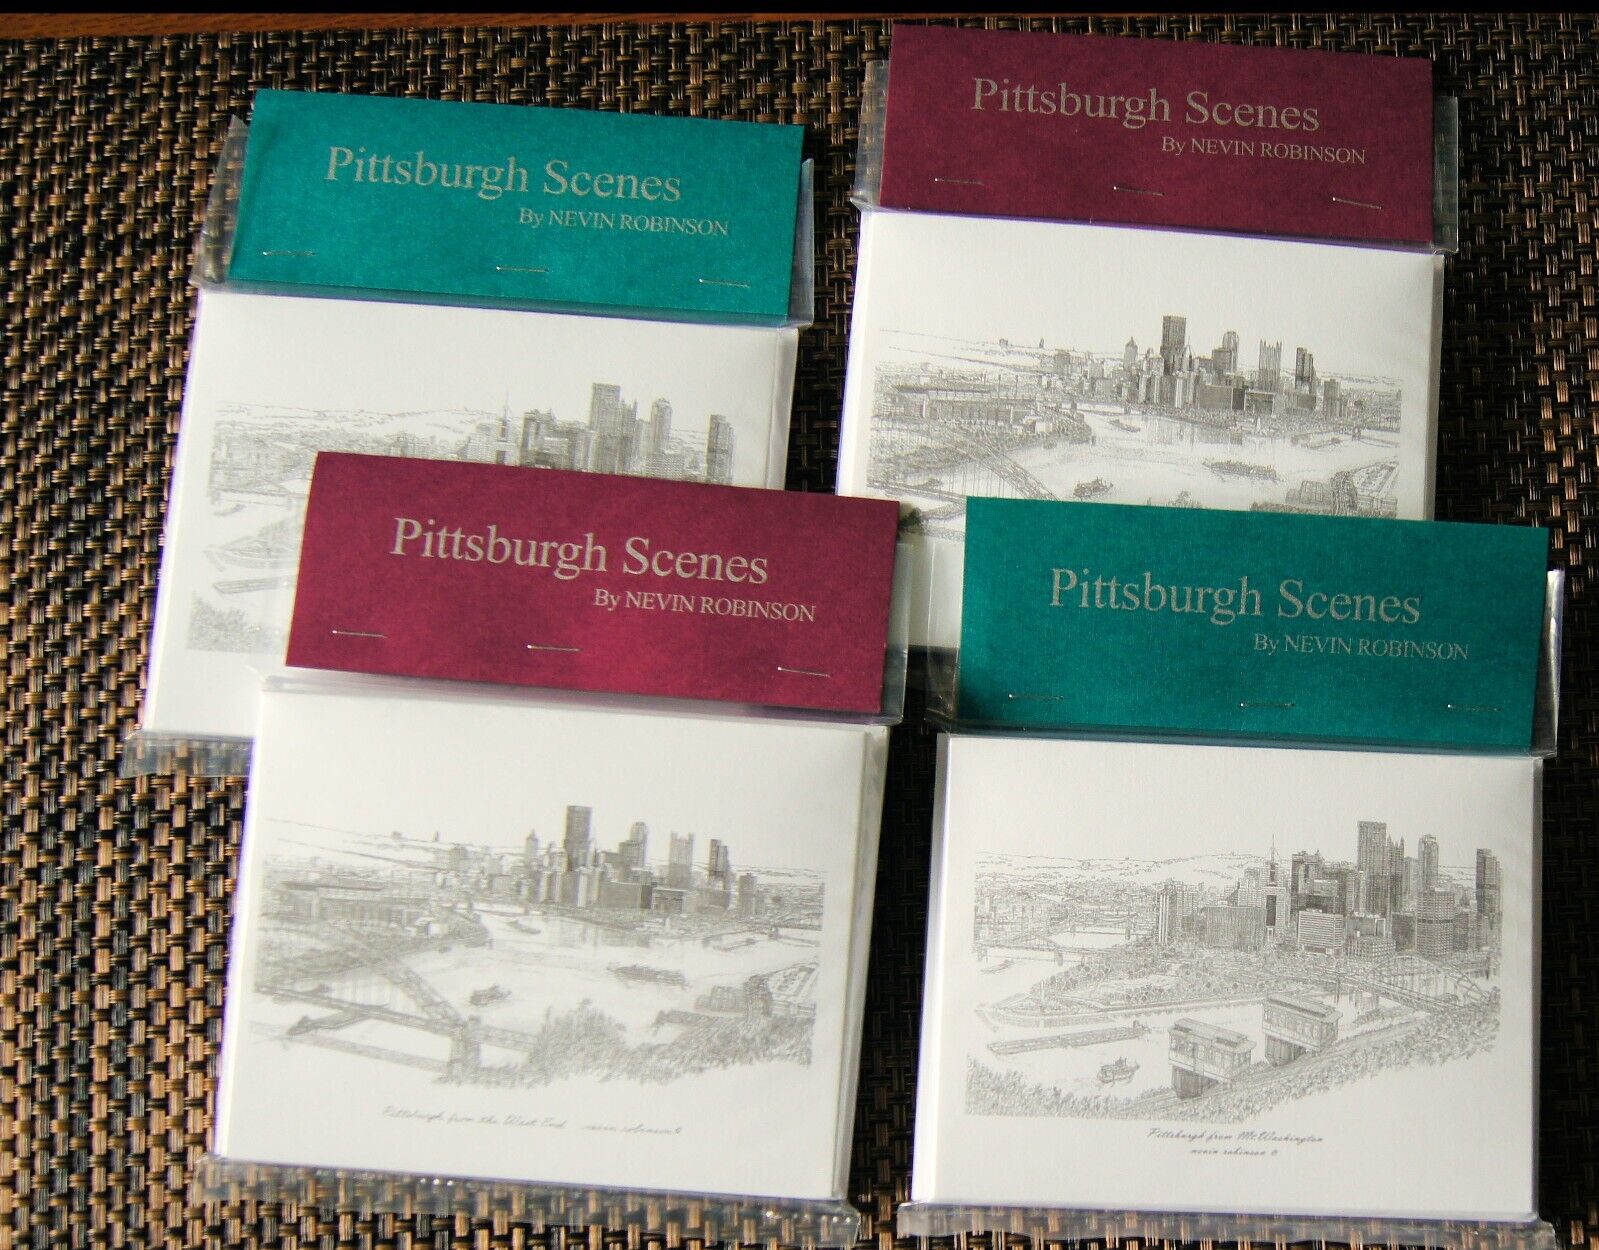  Pittsburgh Scenes Note Cards by Nevin Robinson